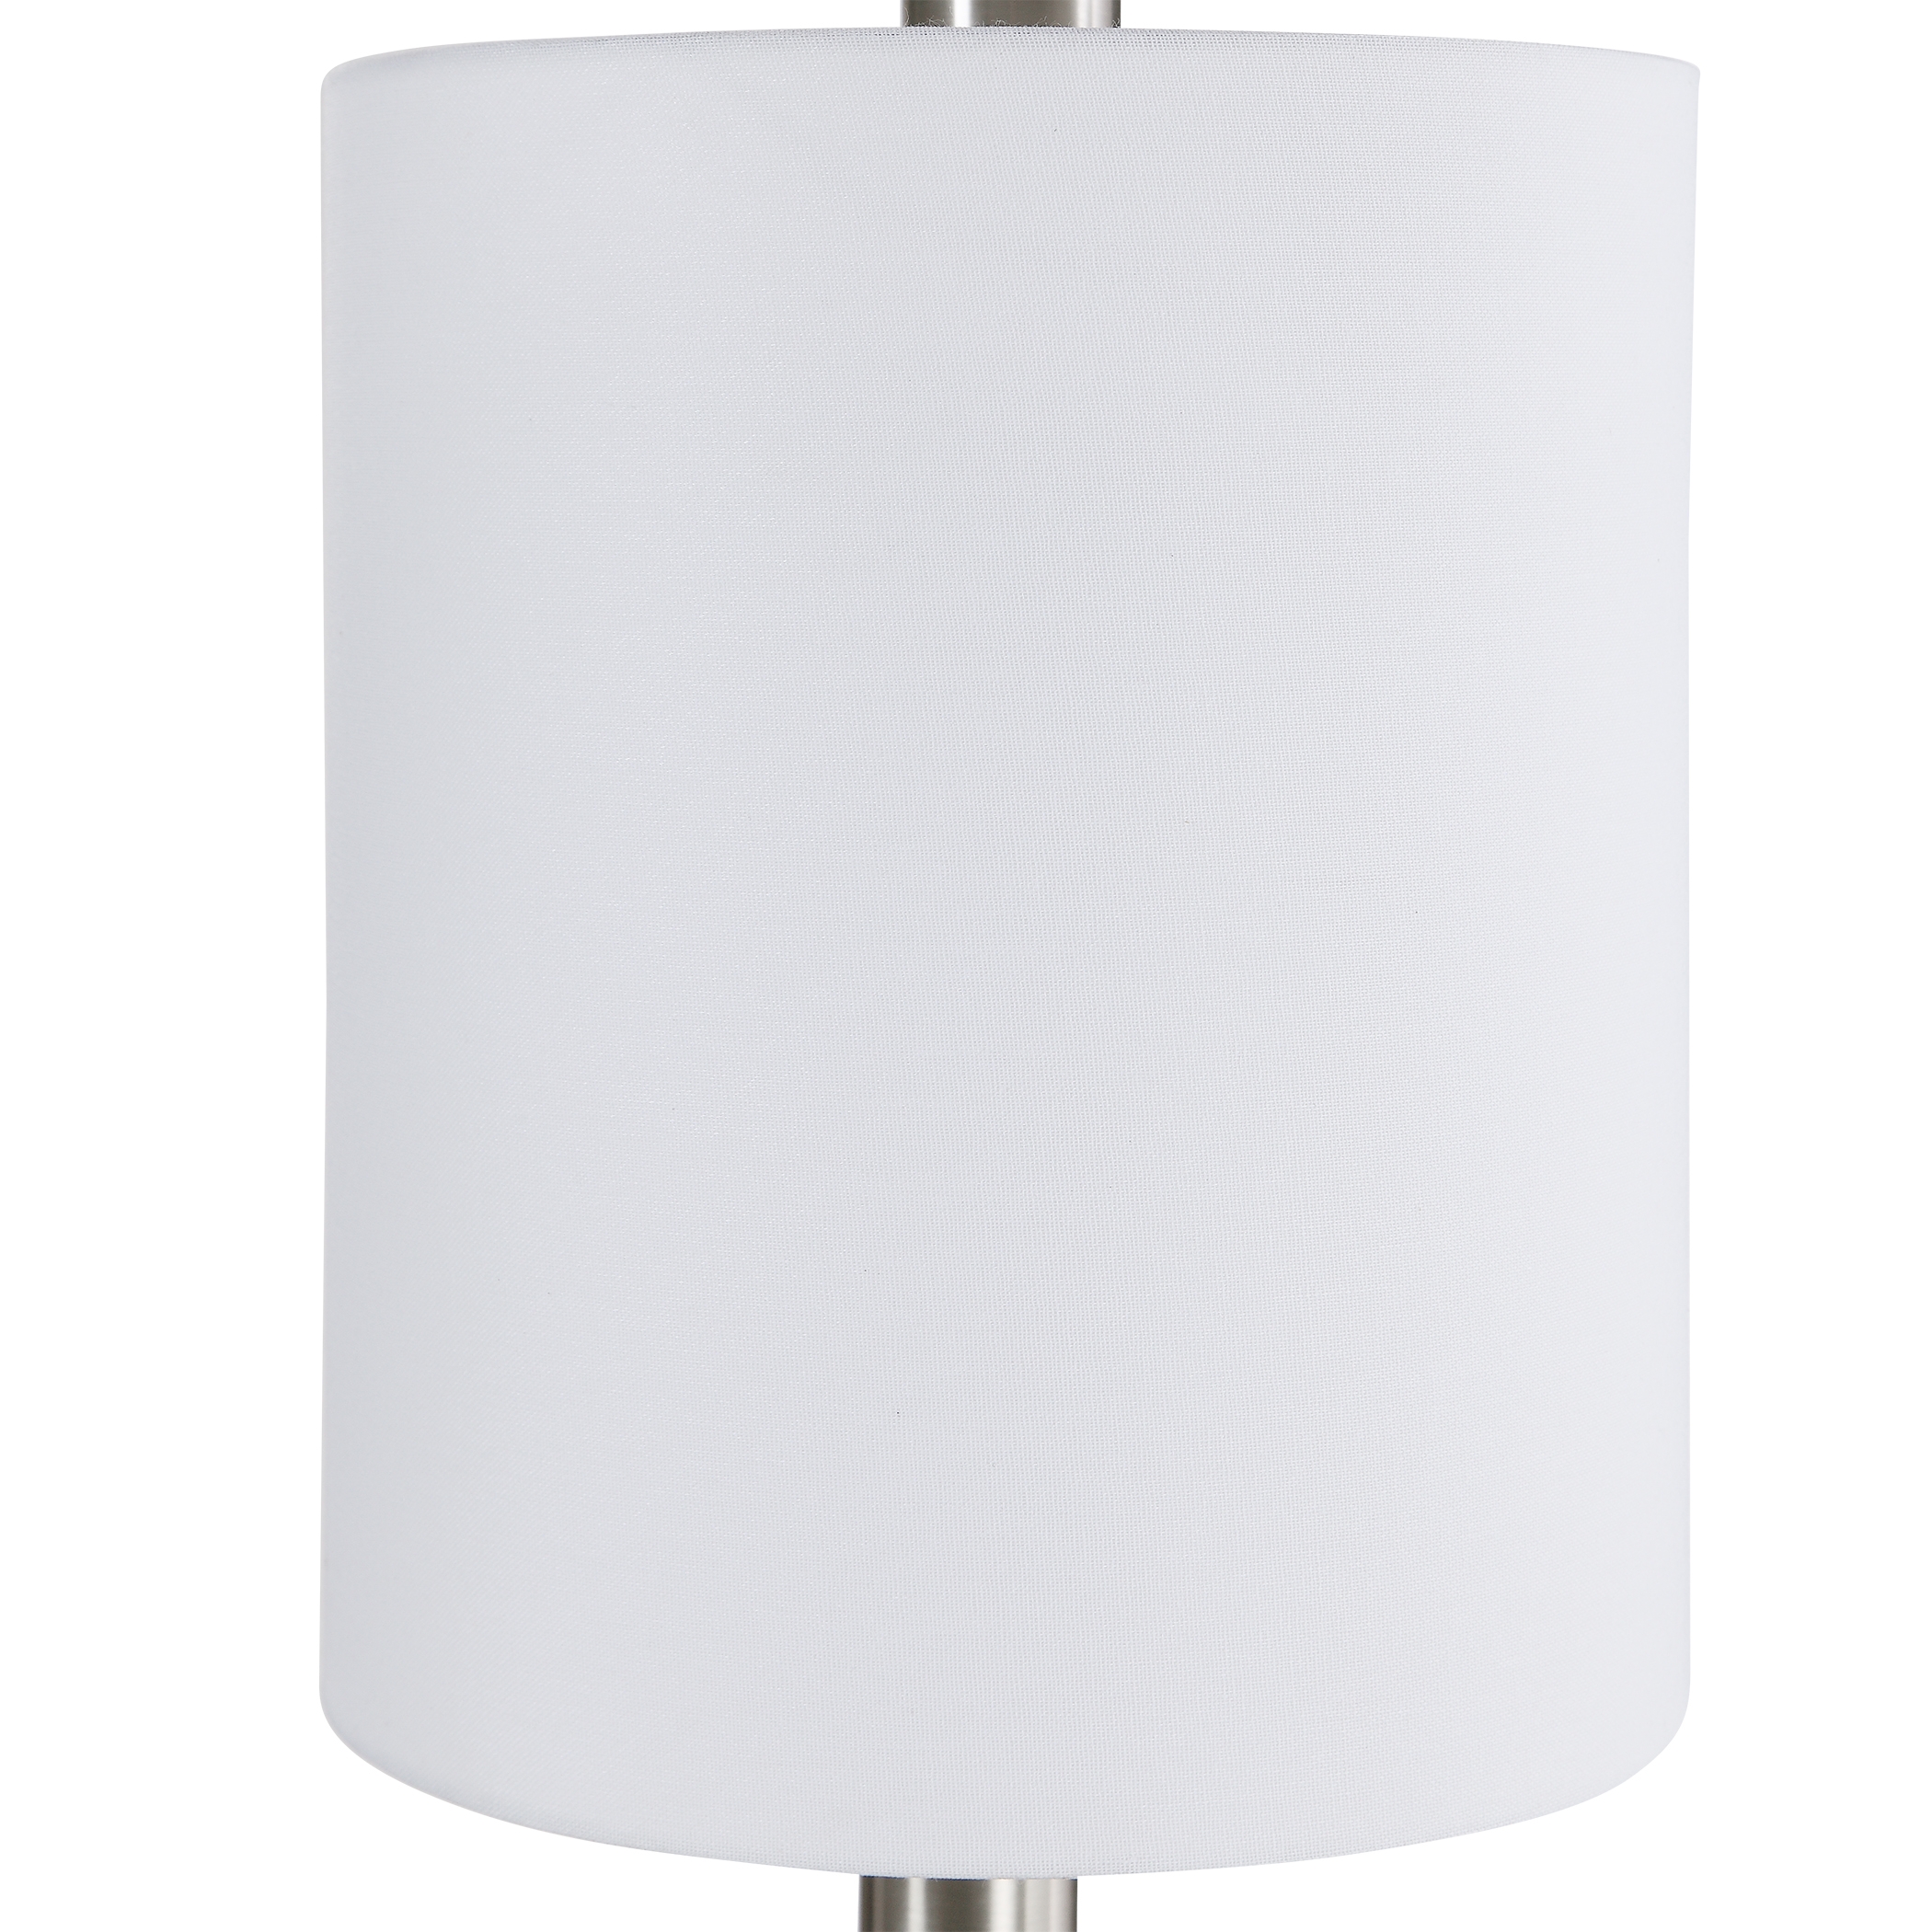 Aderia Sage Green Accent Lamp - Image 3